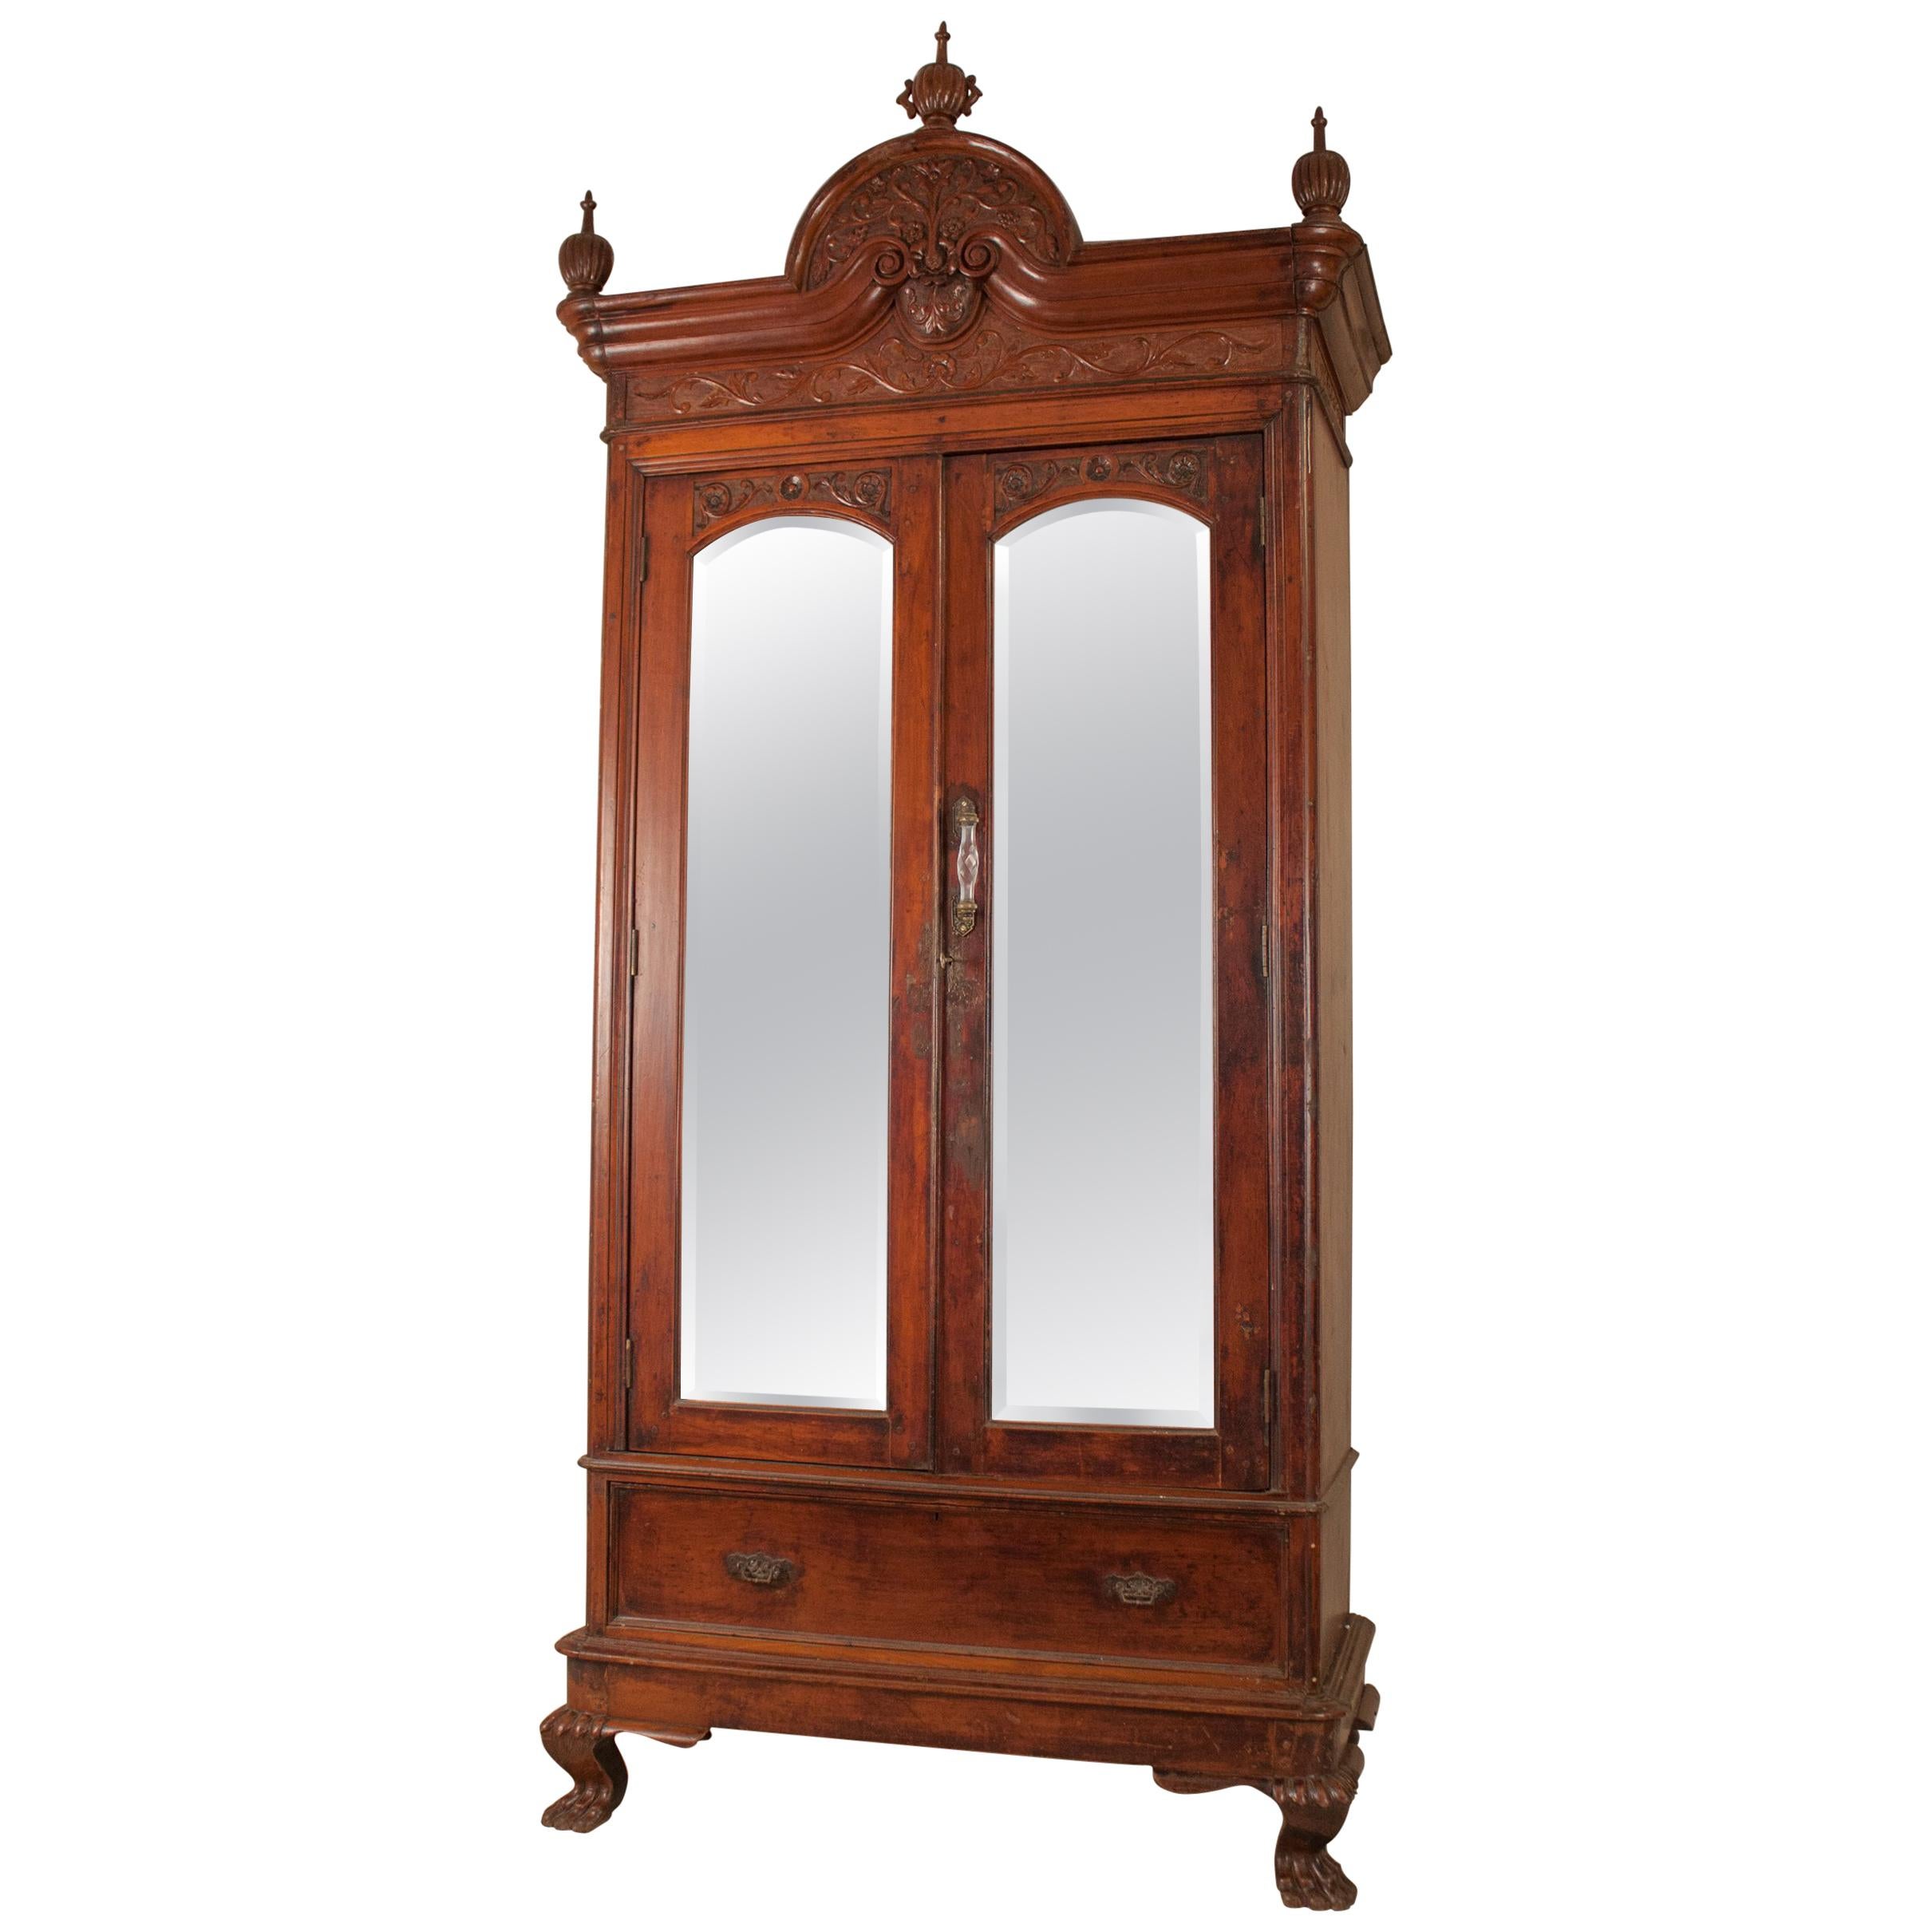 Early 20th Century Anglo-Indian Mahogany Armoire Storage Cabinet